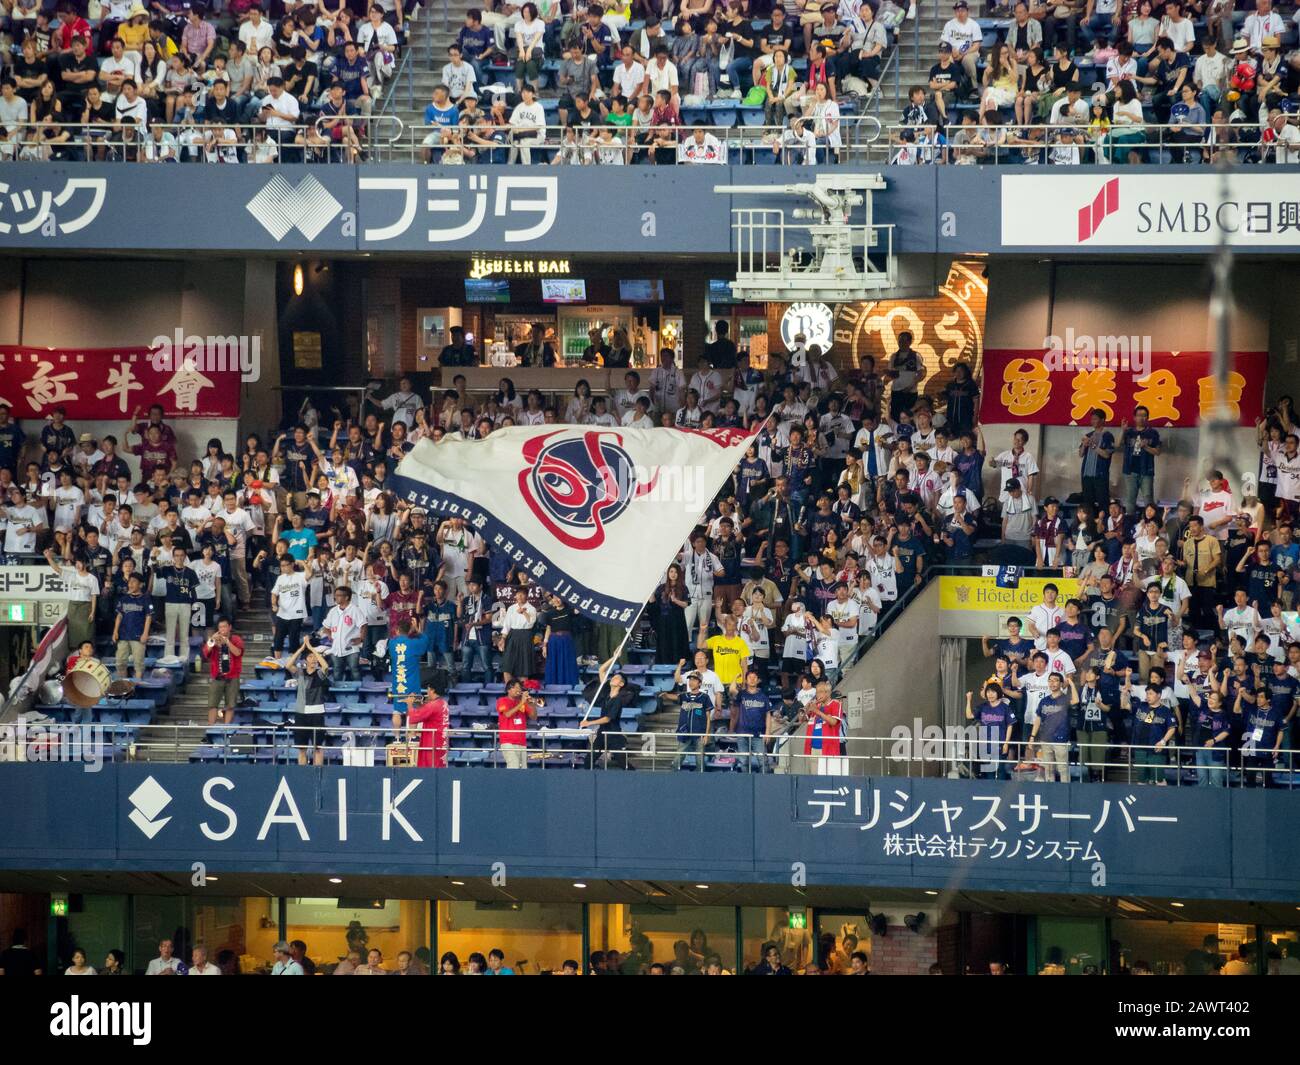 A view of the Orix Buffaloes' 'oendan' or organized cheering group of fans in the right field bleachers at the Kyocera Dome in Osaka, Japan. Stock Photo